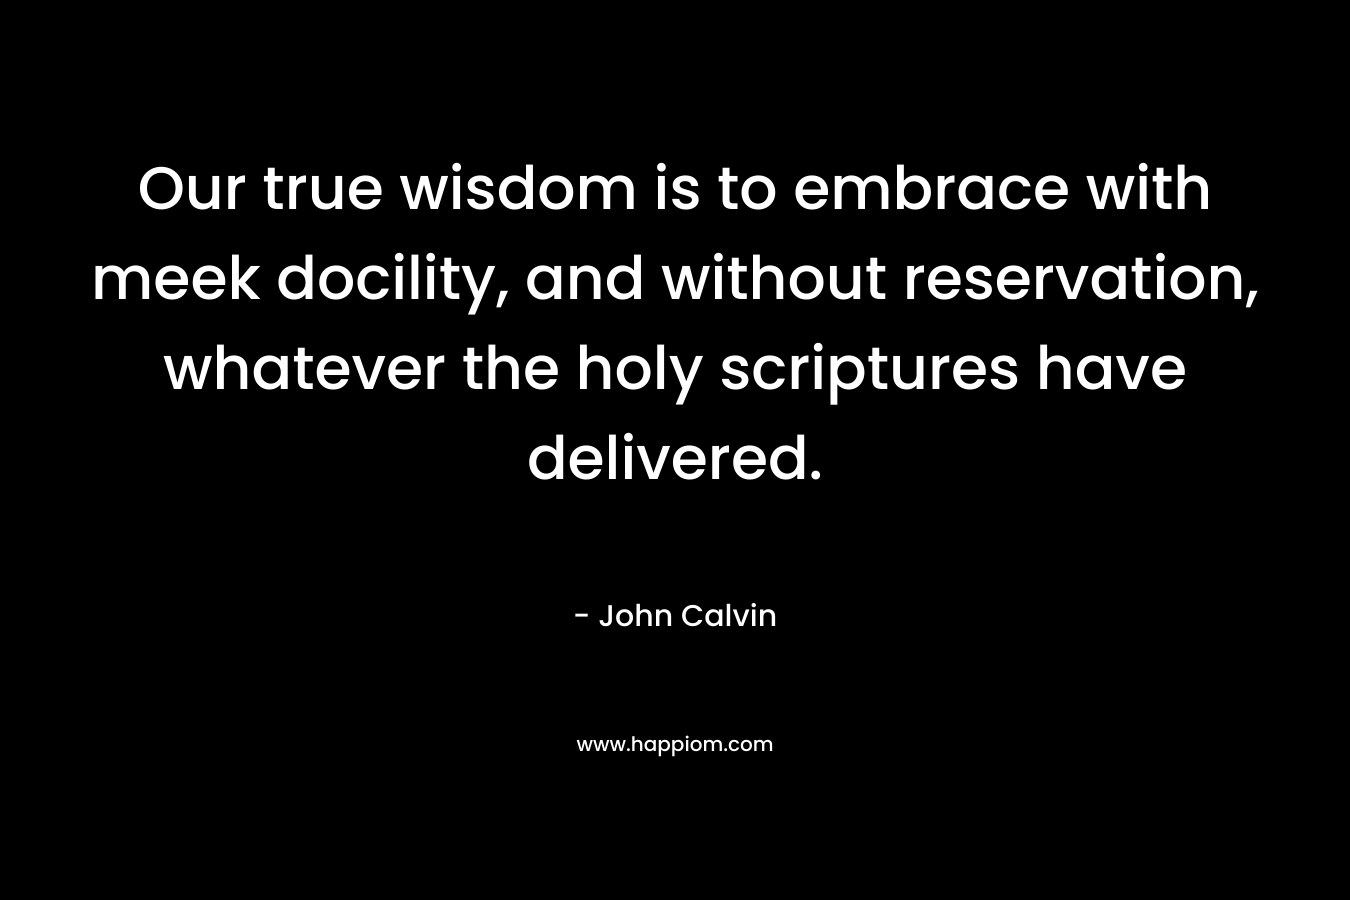 Our true wisdom is to embrace with meek docility, and without reservation, whatever the holy scriptures have delivered. – John Calvin